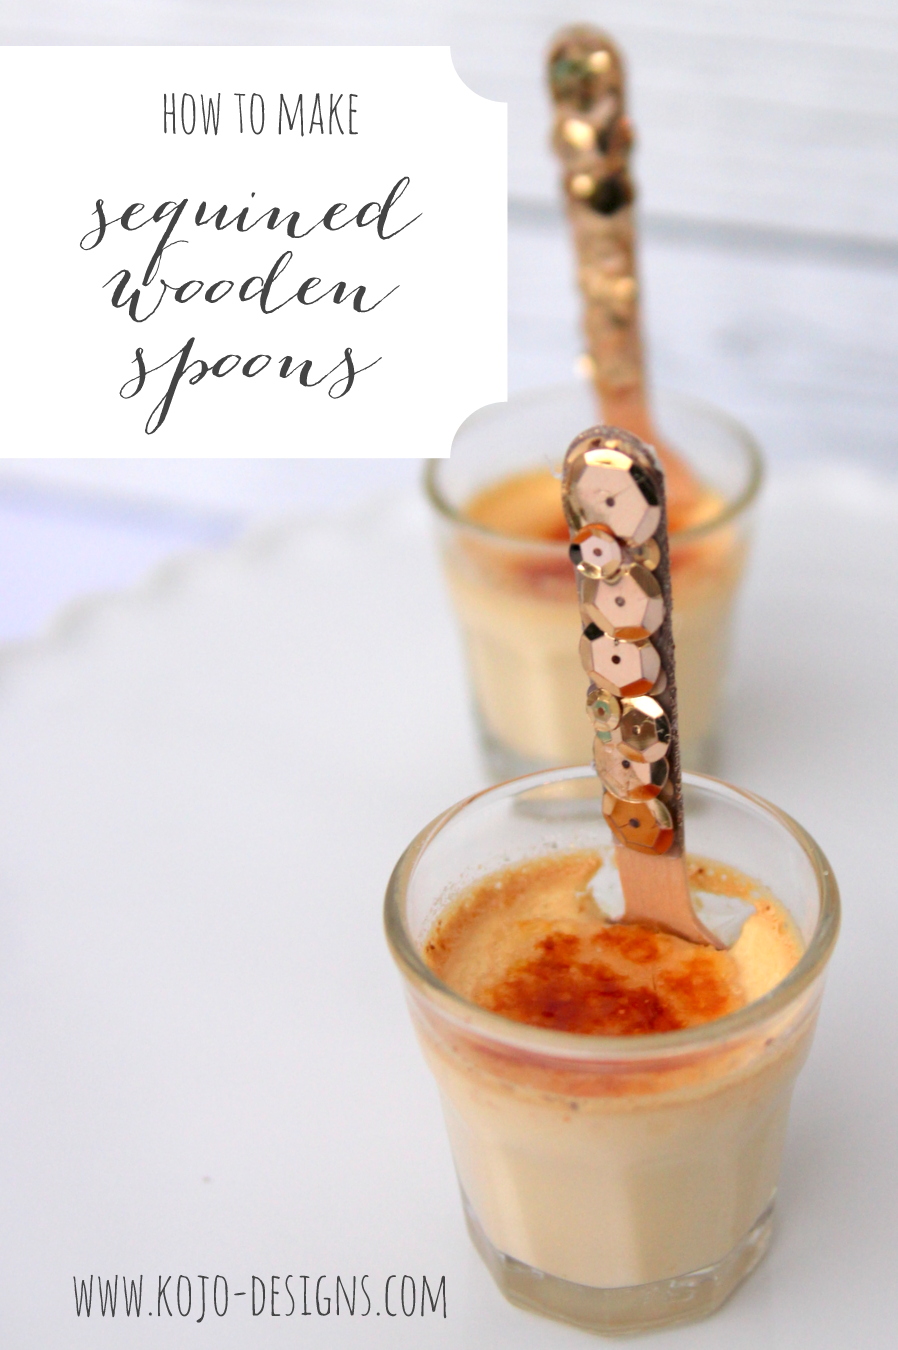 how to make sequin covered wooden spoons